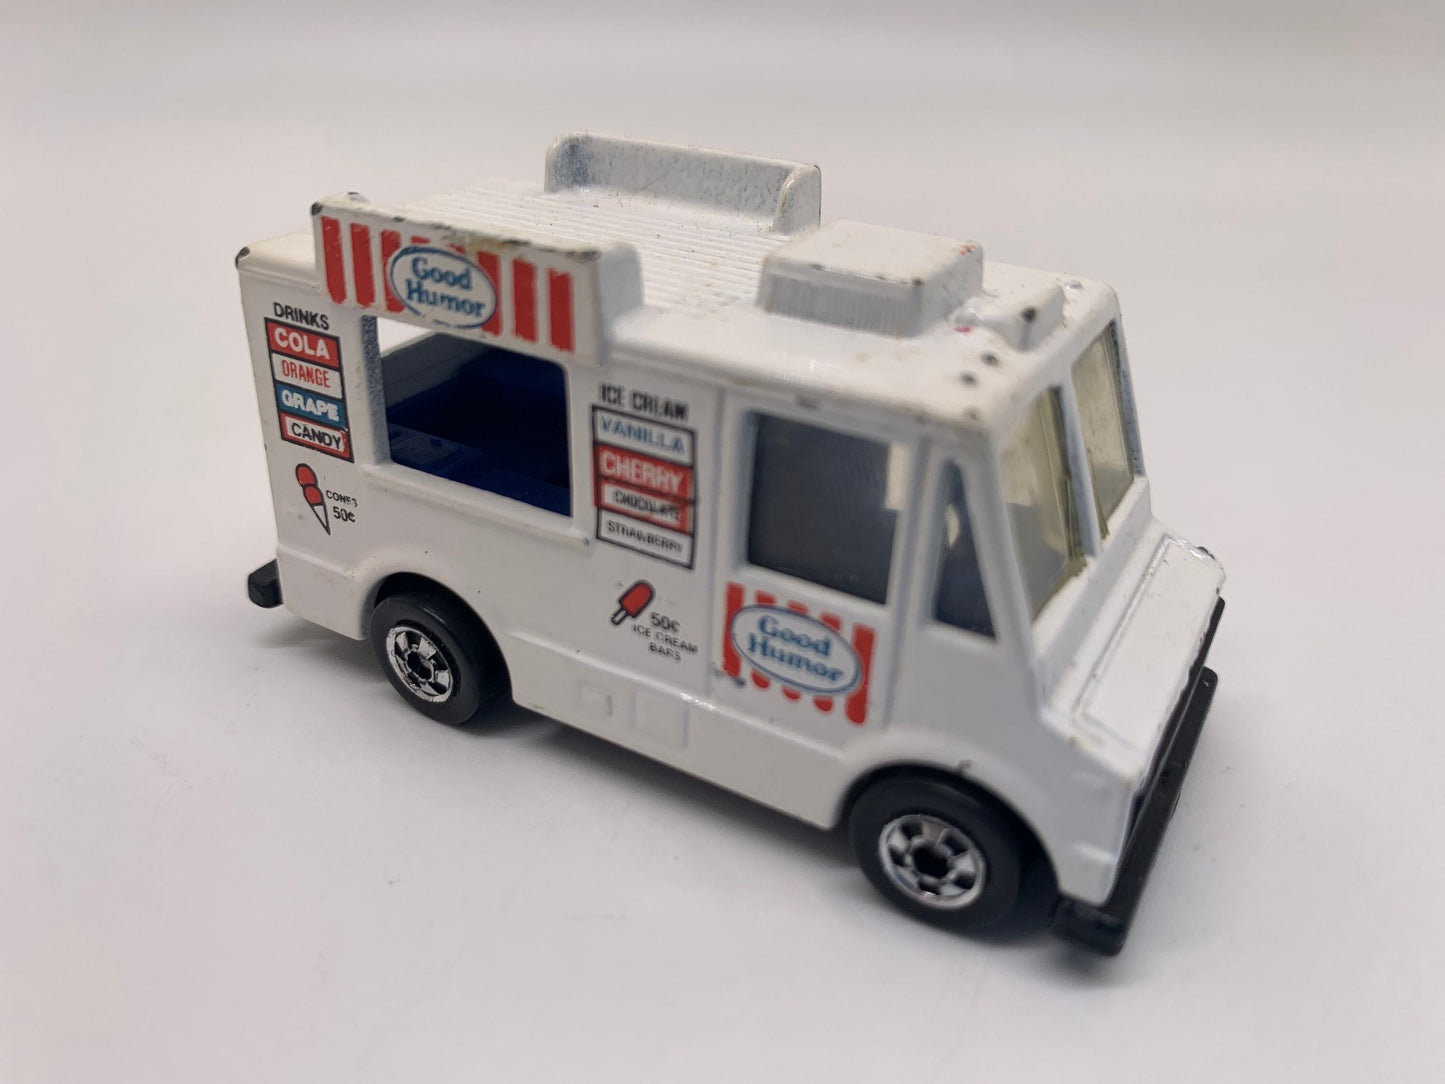 Hot Wheels Good Humor Ice Cream Truck White Collectable Diecast 1/64 Scale Miniature Model Toy Car